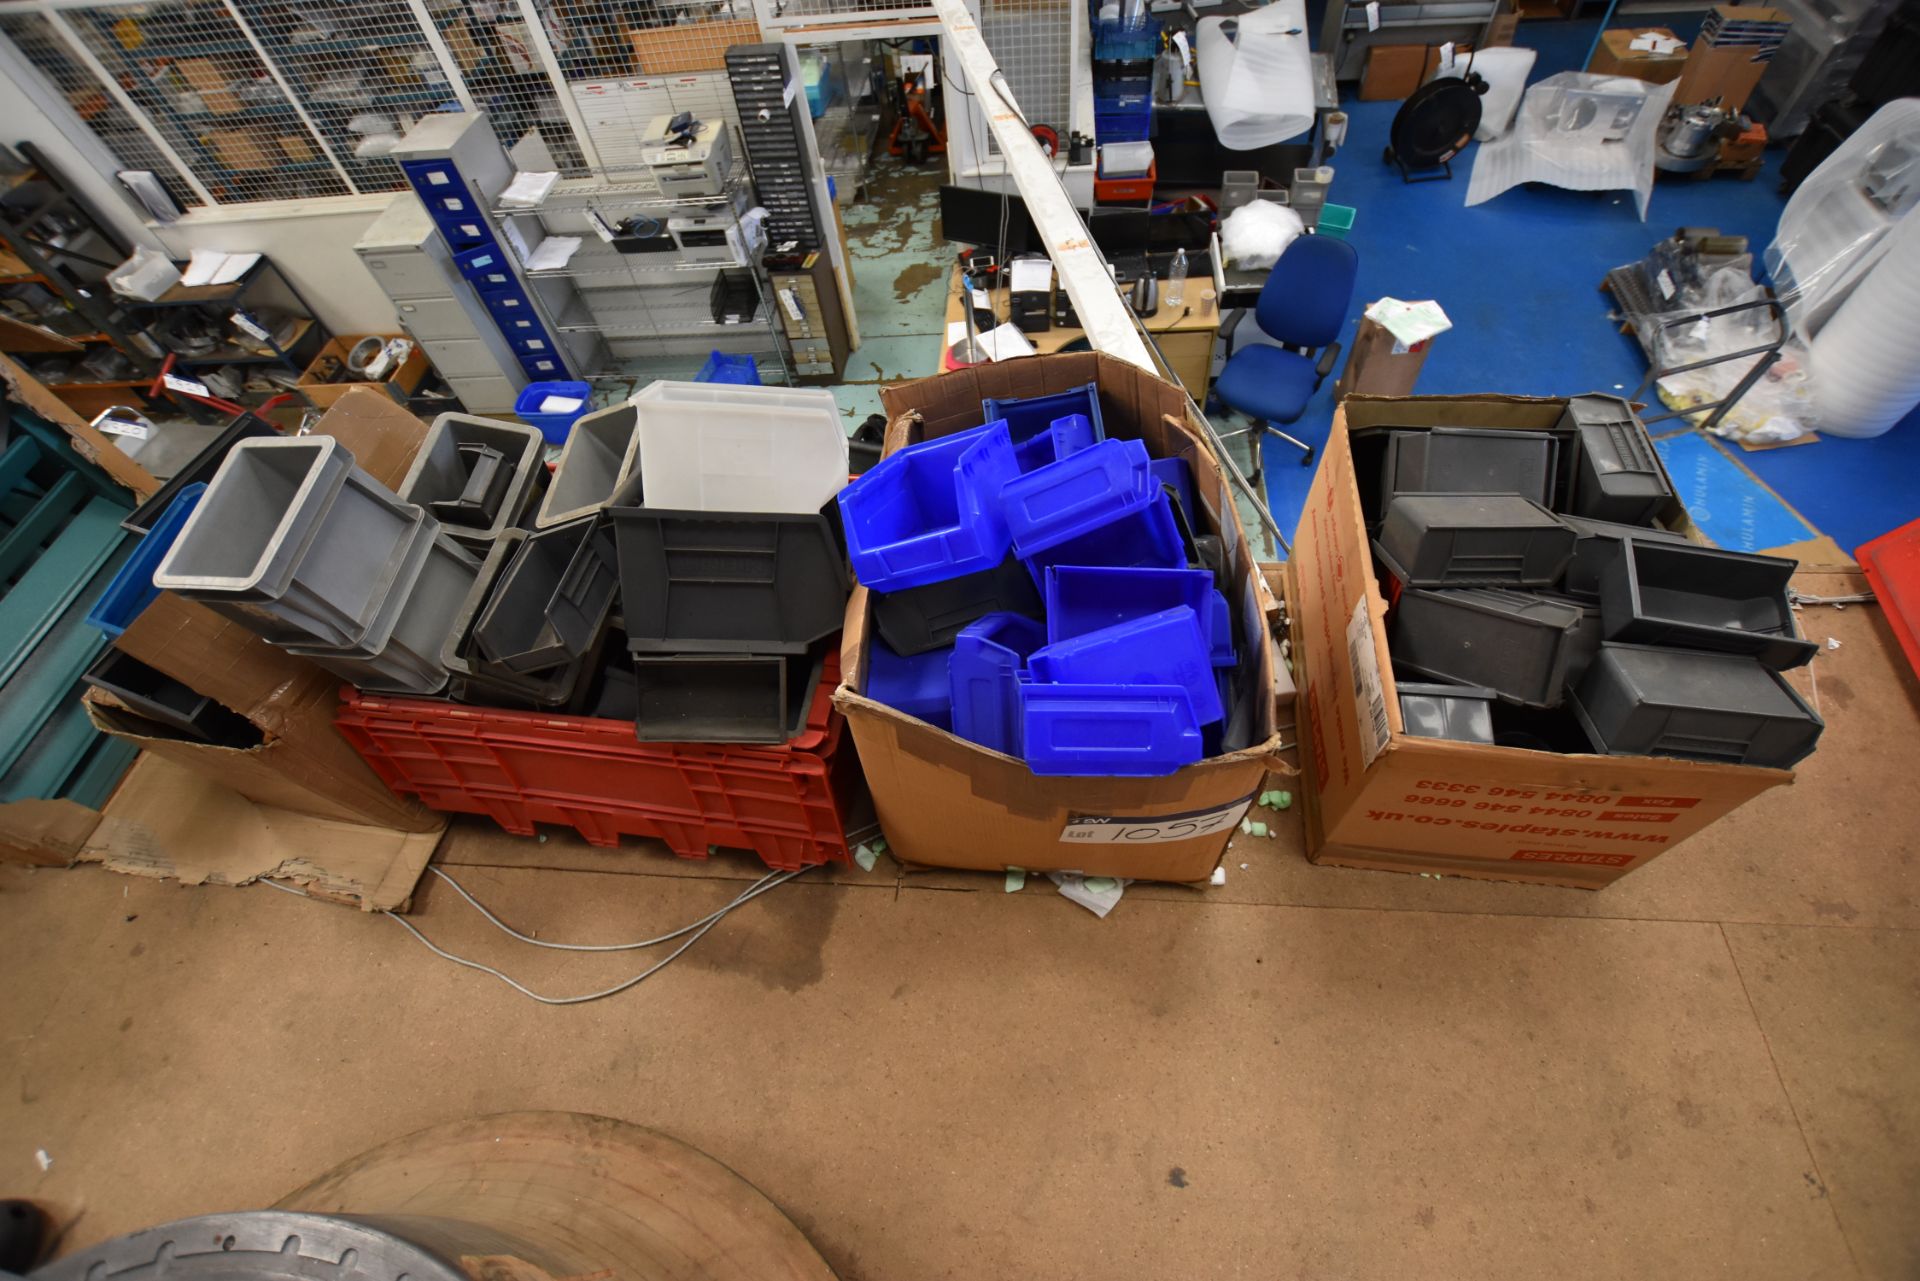 Plastic Bins, as set out in one area